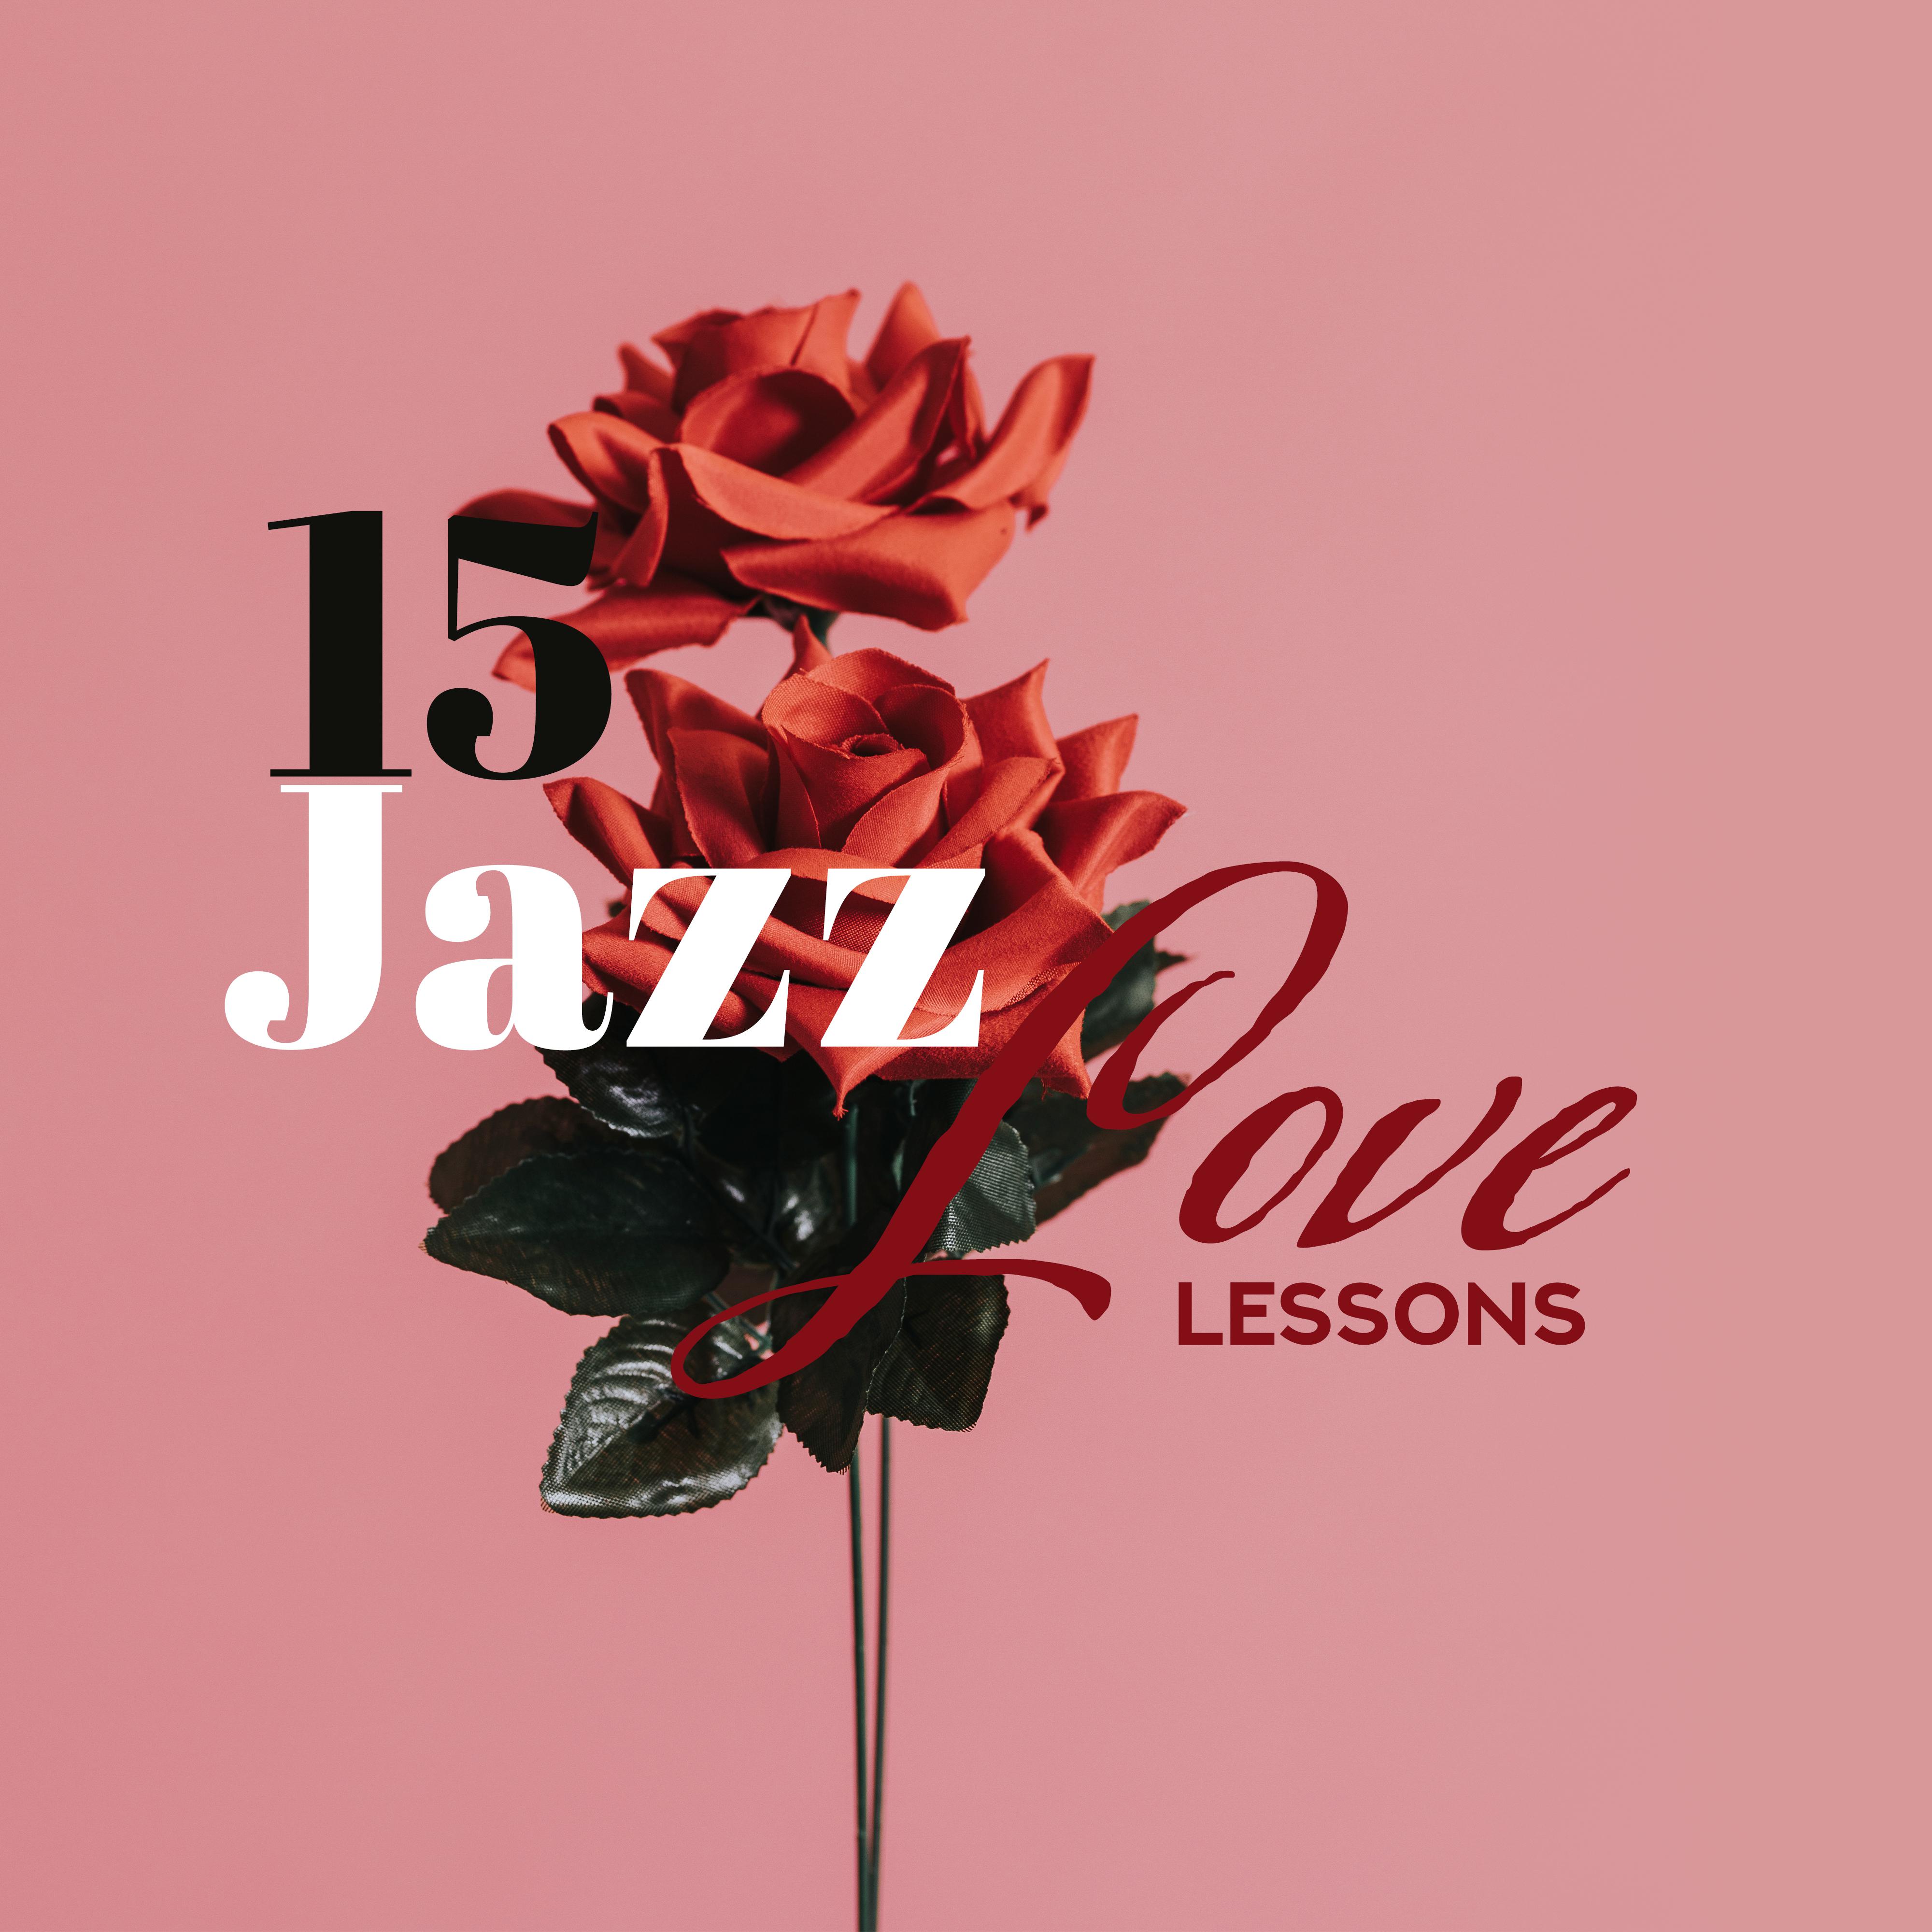 15 Jazz Love Lessons: 2019 Smooth Instrumental Jazz Selection for Couples, Best Love Anthems for Romantic Dinner, Wine Drining, Hot Bath Togeter & Intimate Moments in Bedroom